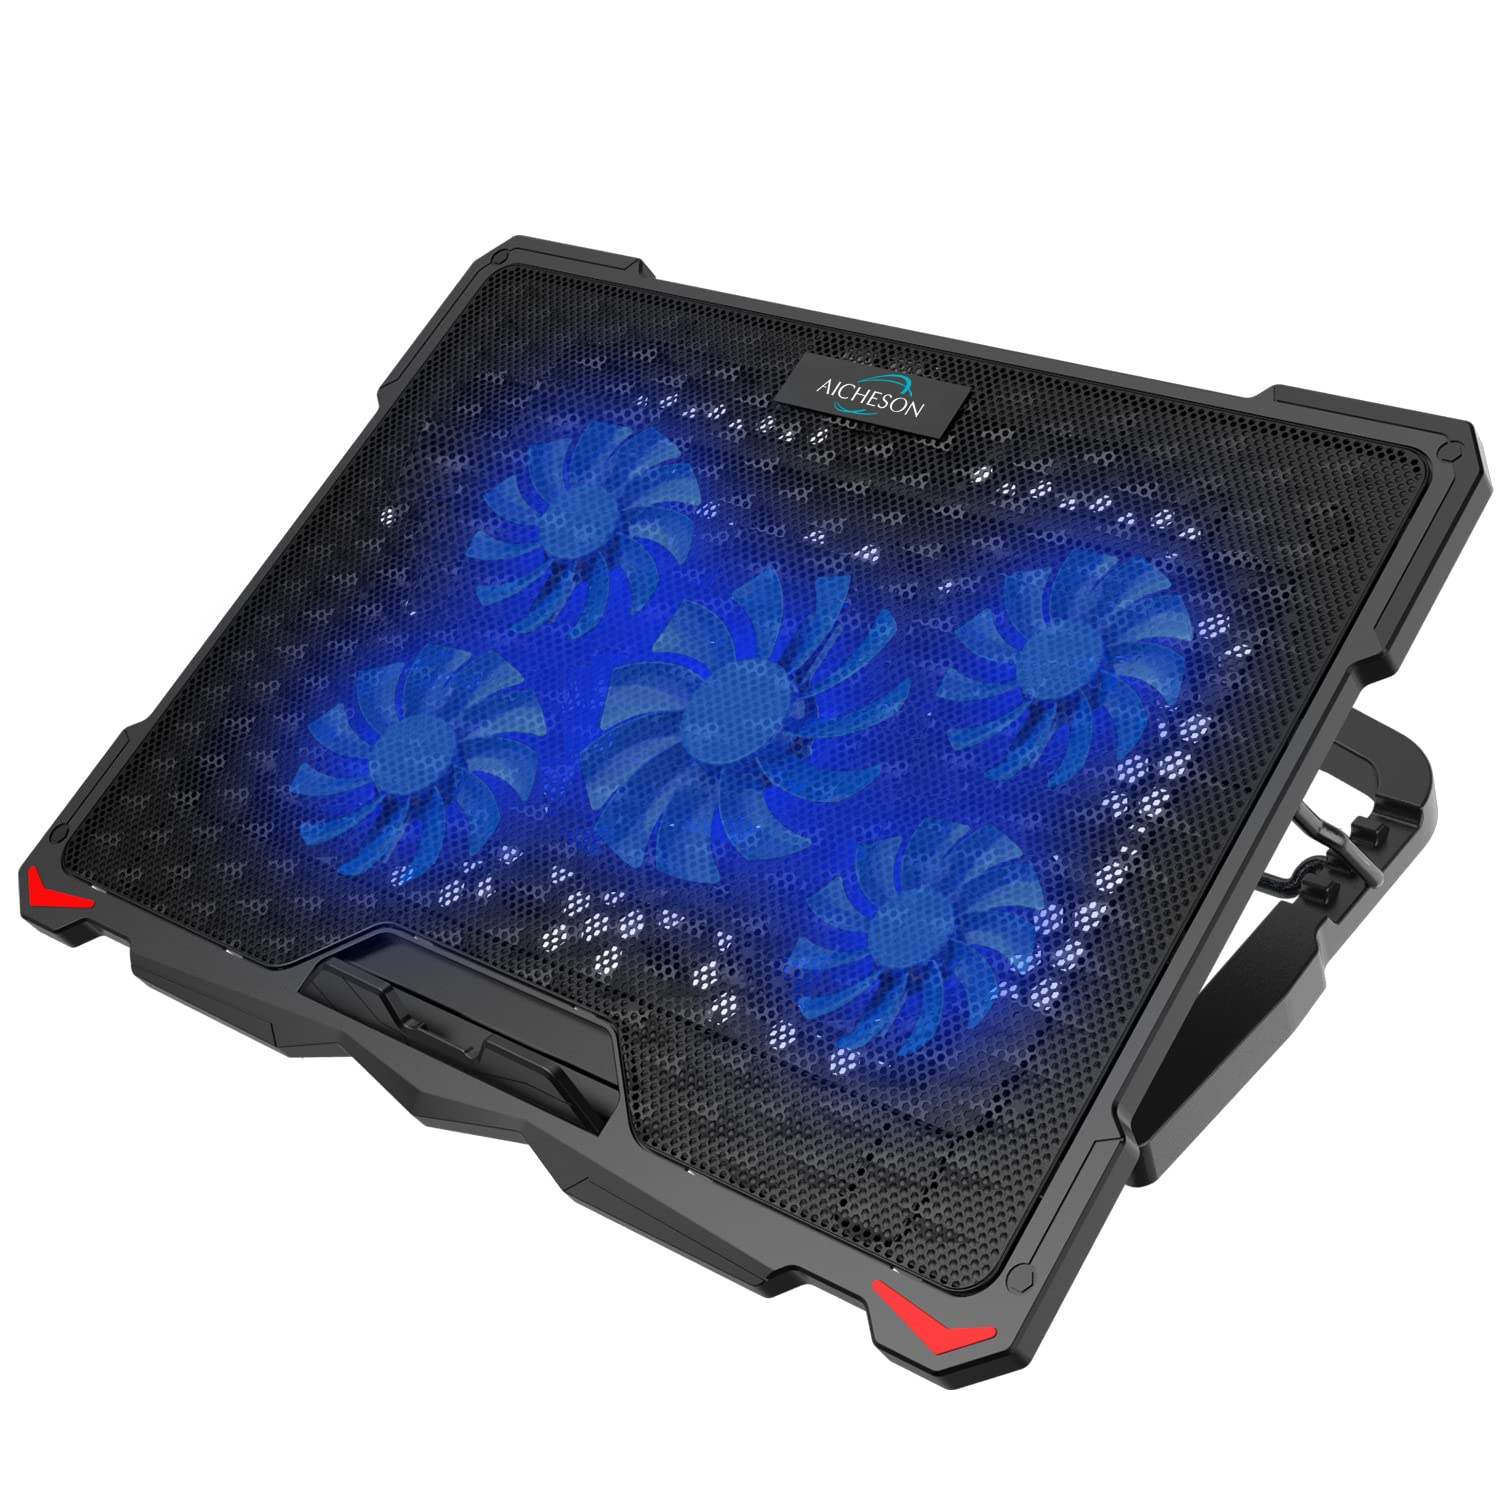 AICHESON Laptop Cooling Pad 5 Fans Up to 17.3 Inch Heavy Notebook Cooler, Blue LED Lights, 2 USB Ports, S035